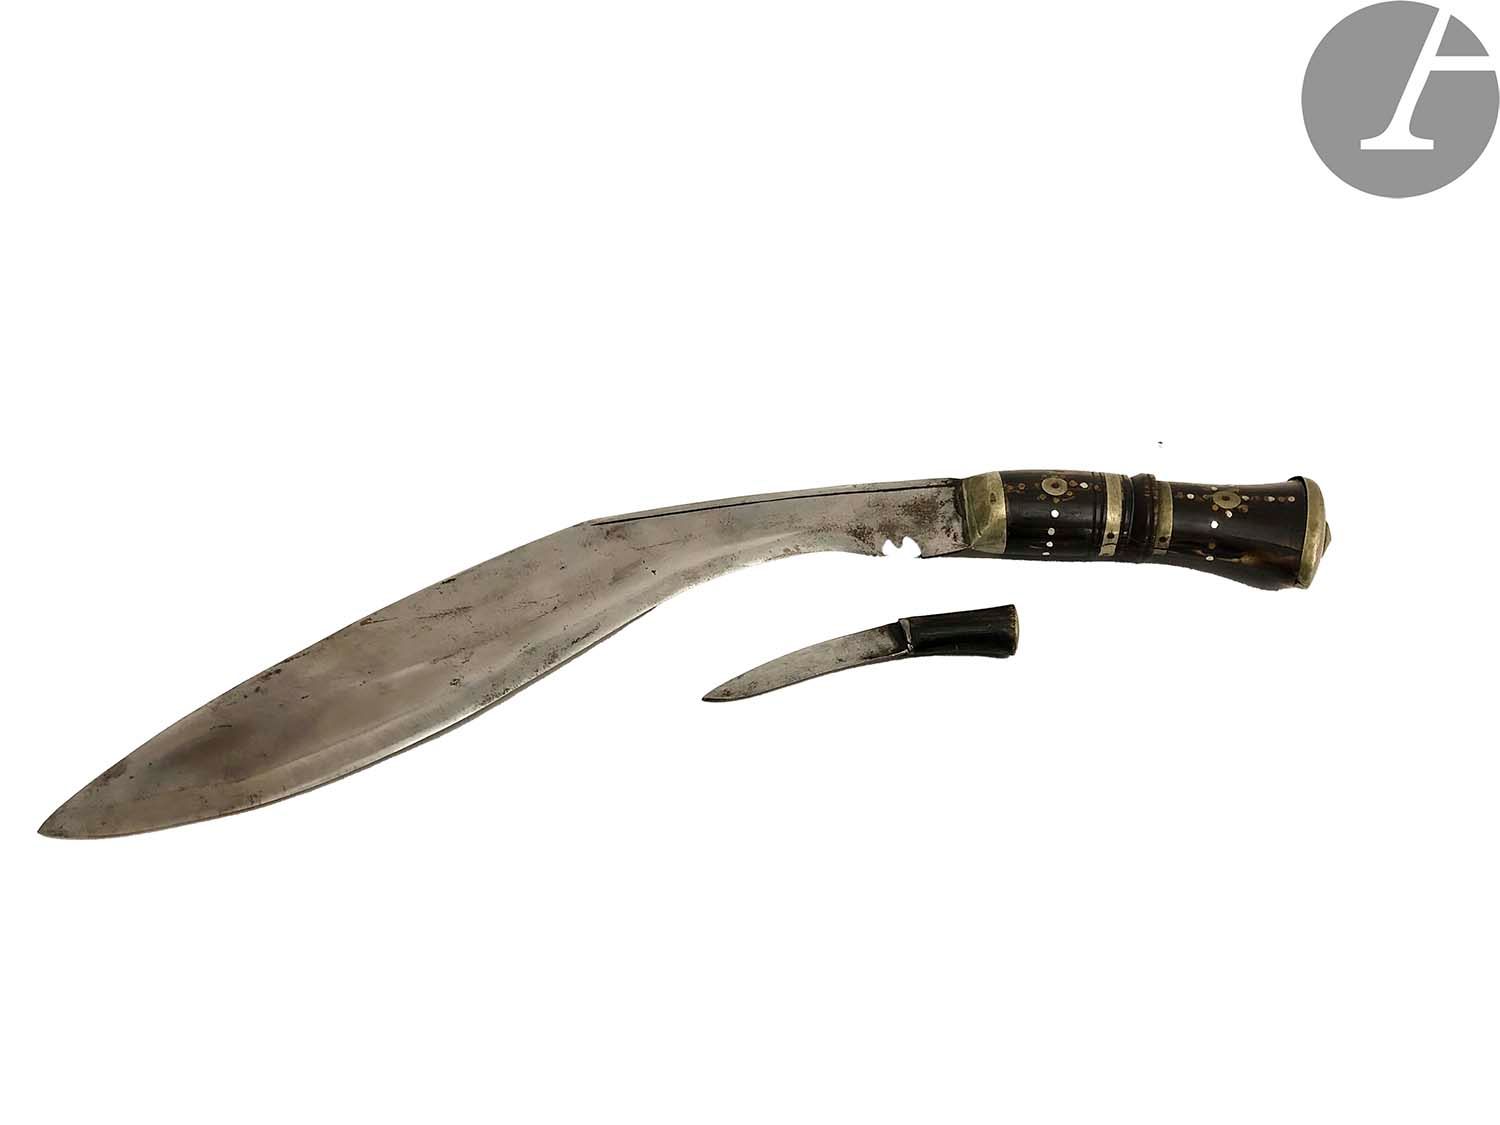 Null Dagger, fuse with inlaid metal circles and a small knife in the same leathe&hellip;